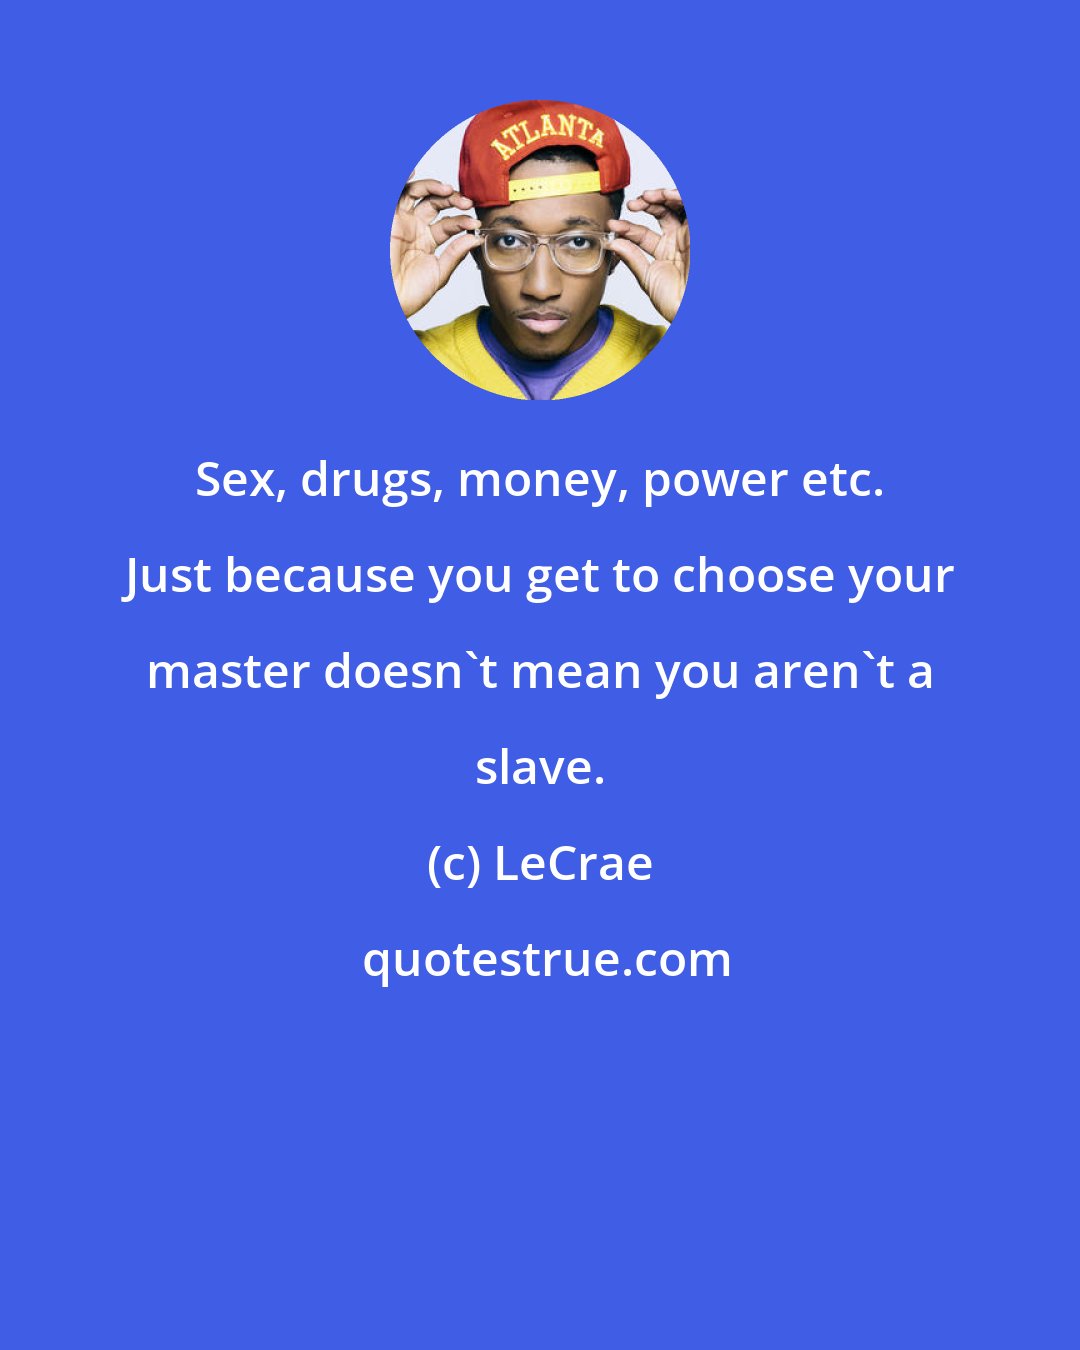 LeCrae: Sex, drugs, money, power etc. Just because you get to choose your master doesn't mean you aren't a slave.